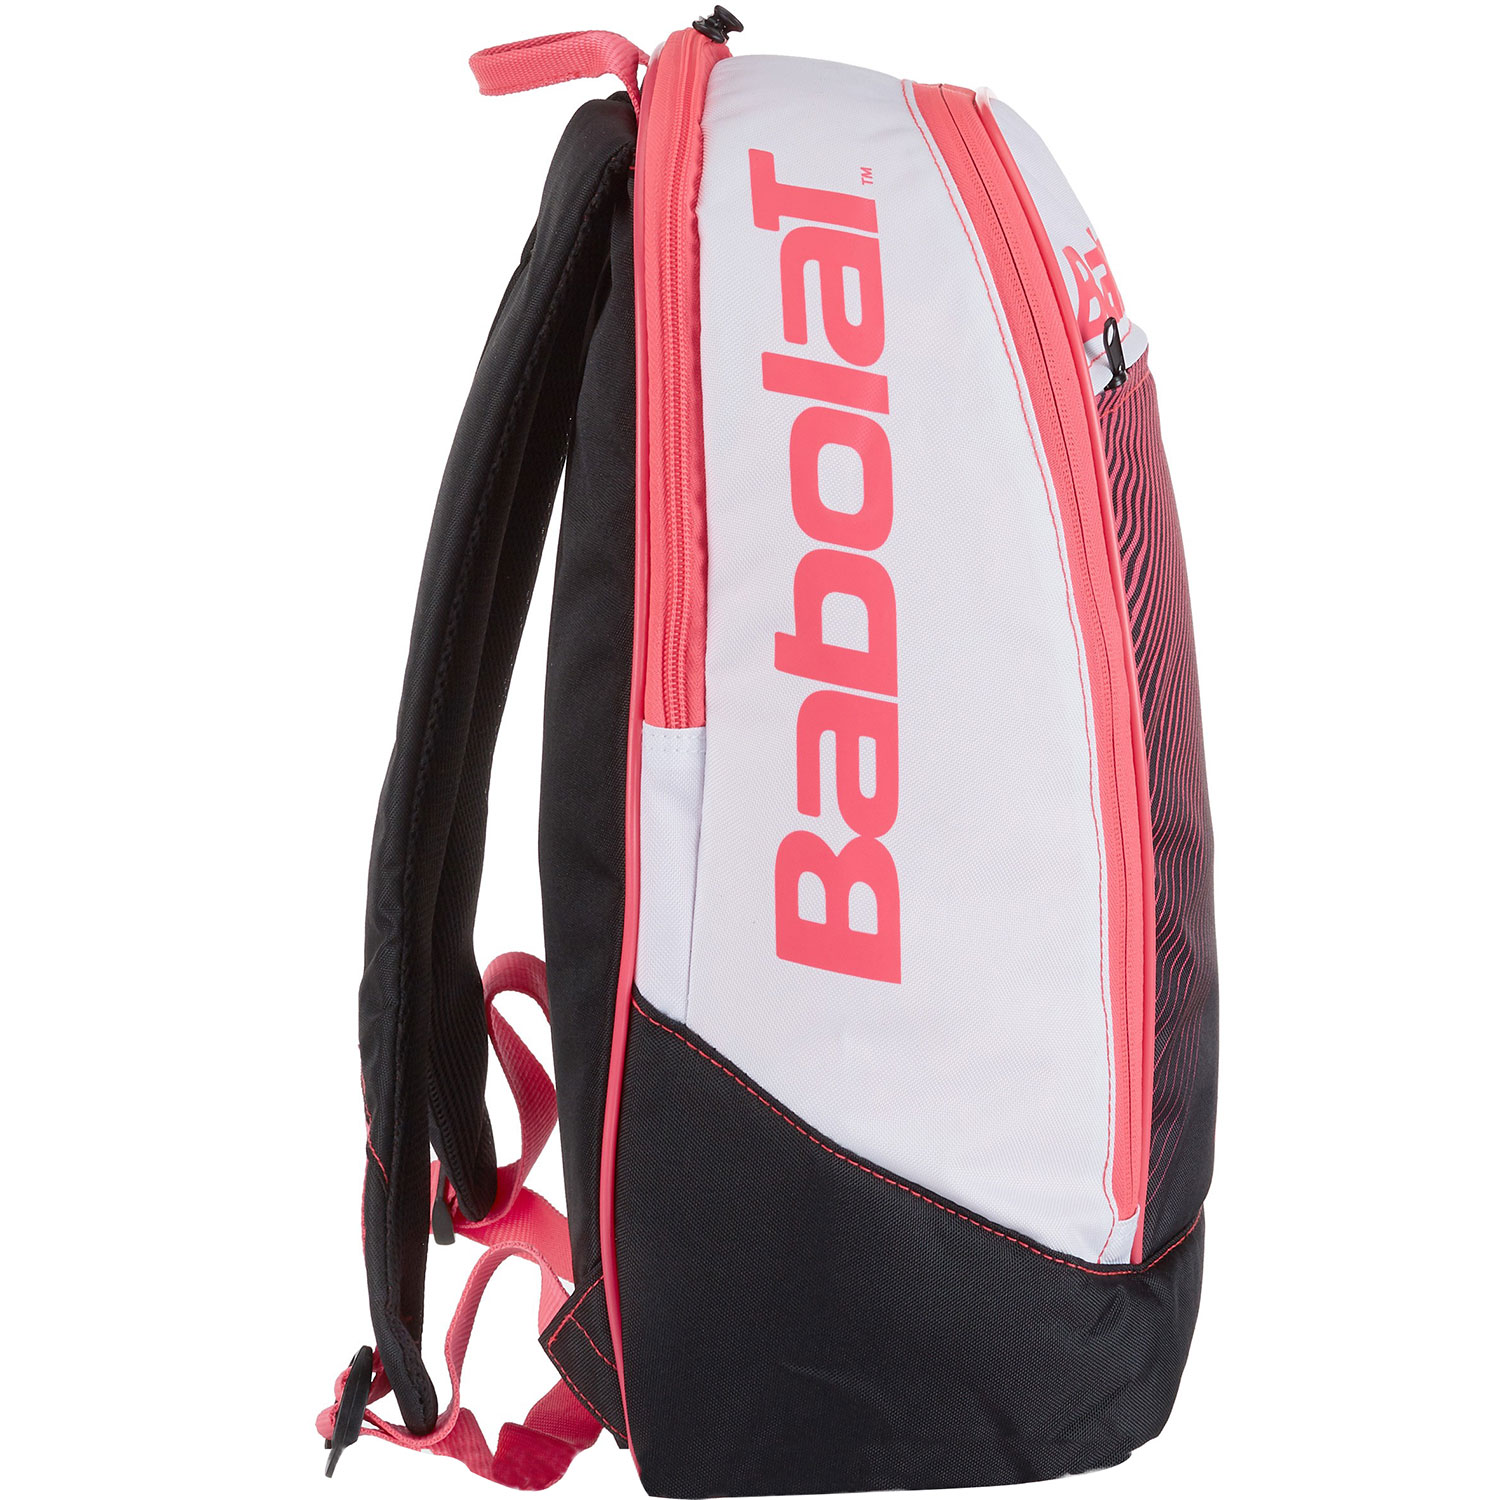 Babolat Classic Club Backpack - Pink